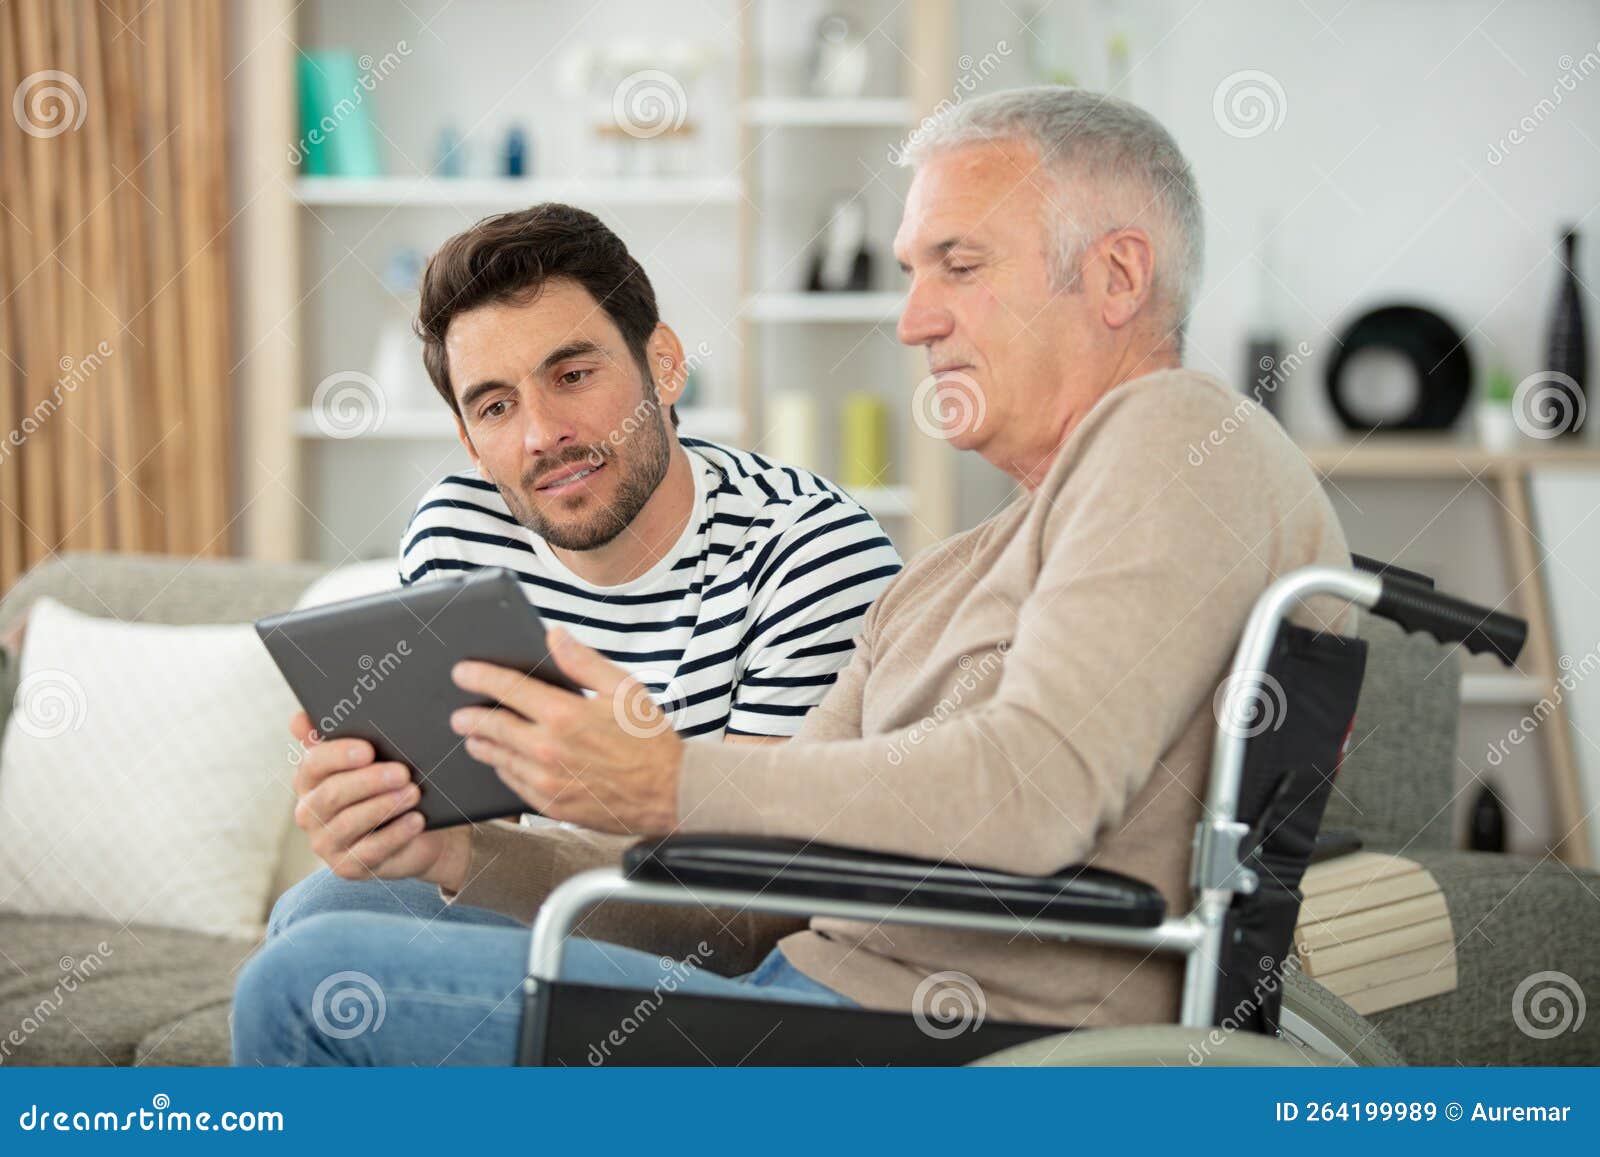 smiling son and father in wheelchair with tablet